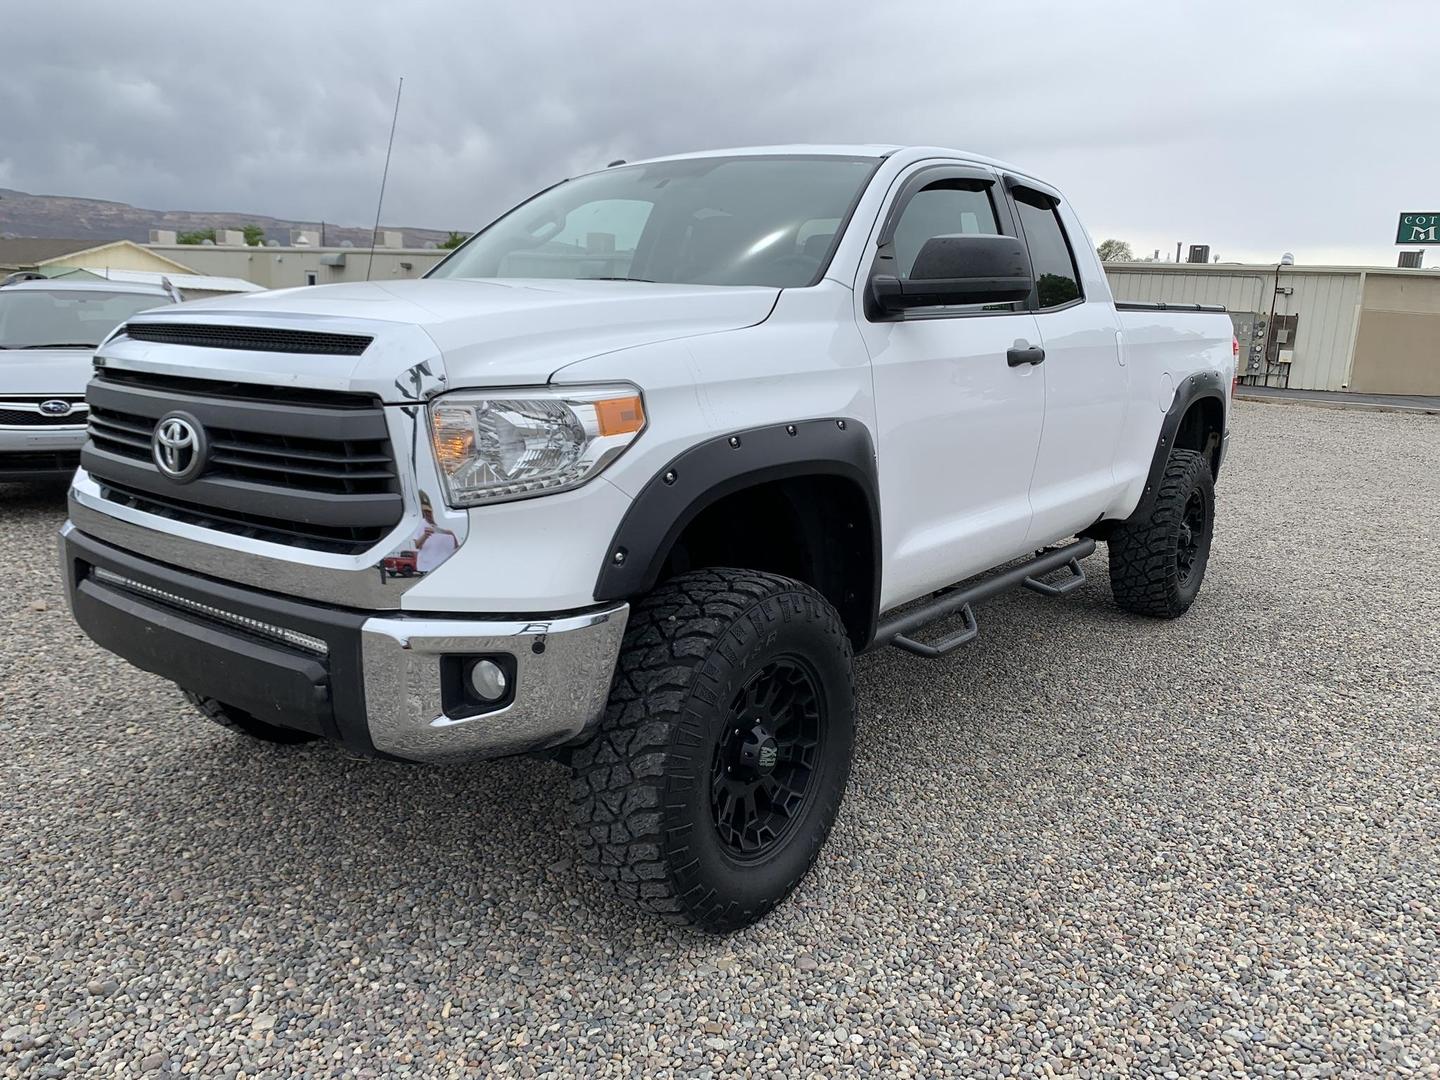 USED TOYOTA TUNDRA DOUBLE CAB 2014 for sale in Grand Junction, CO | C